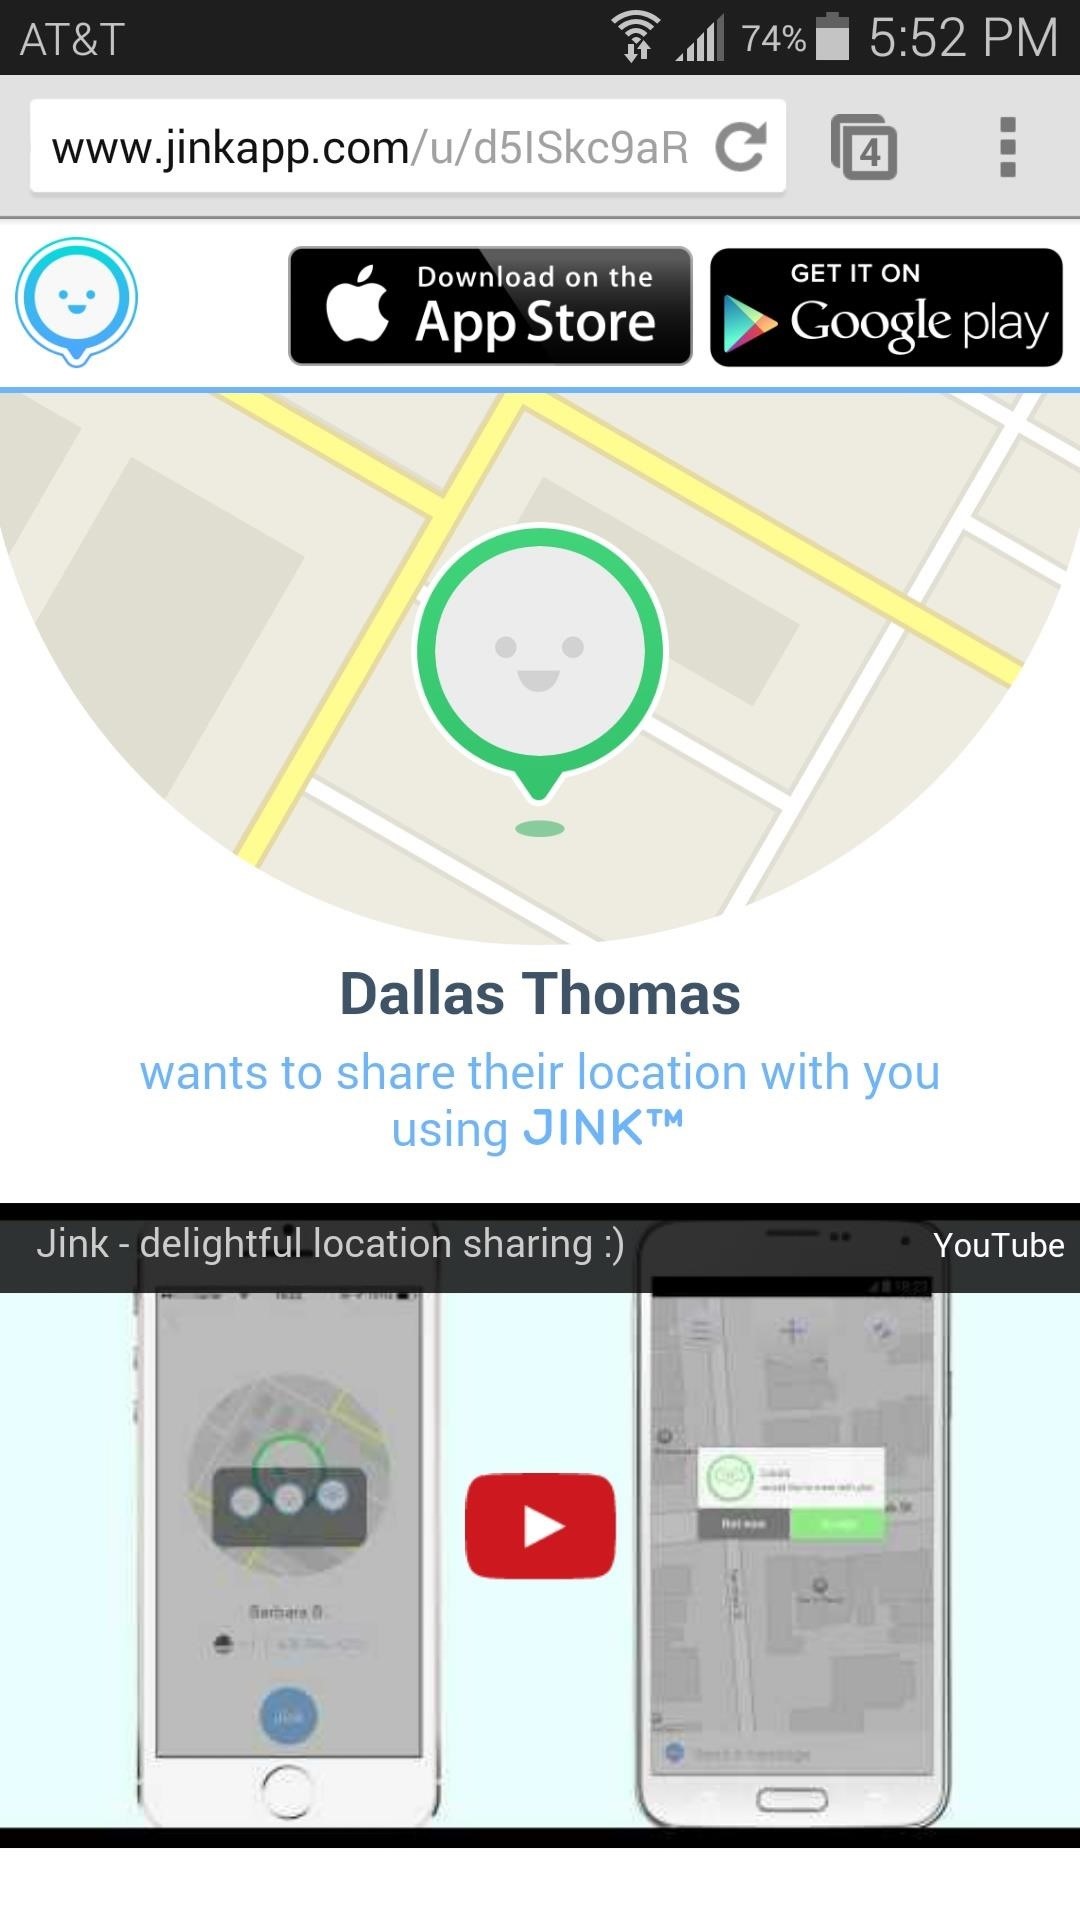 How to Temporarily Share Your Current Location with Friends Until You Meet Up